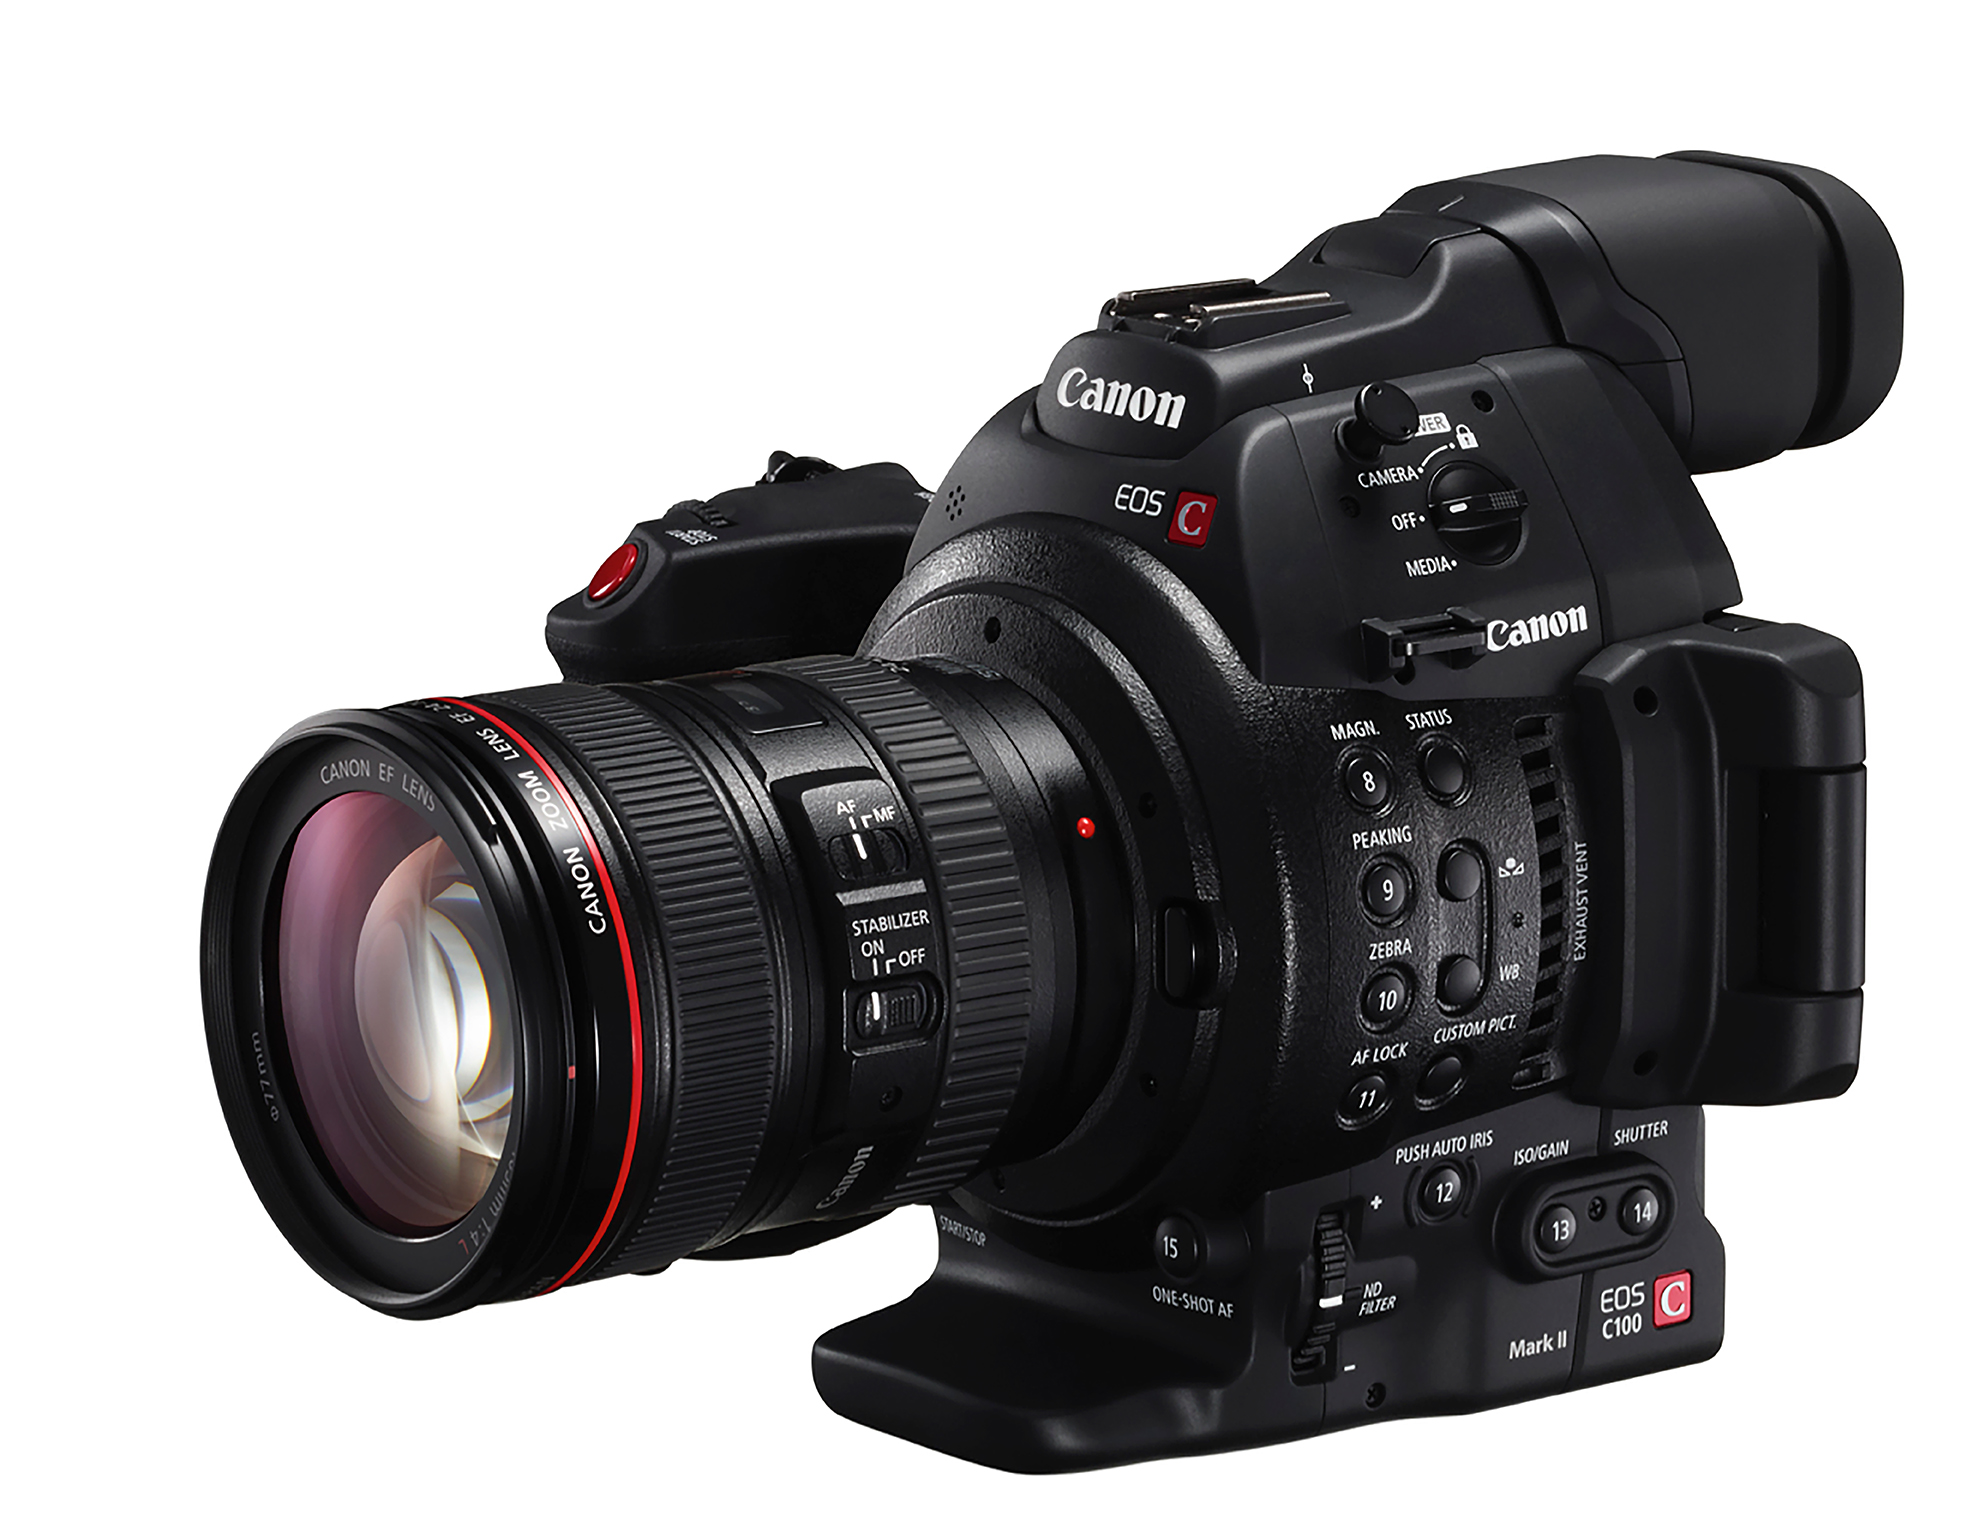 The EOS C100 Mark II will be updated with Shutter Angle Priority. Once installed, this firmware will maintain a constant shutter angle regardless of frame rate changes.